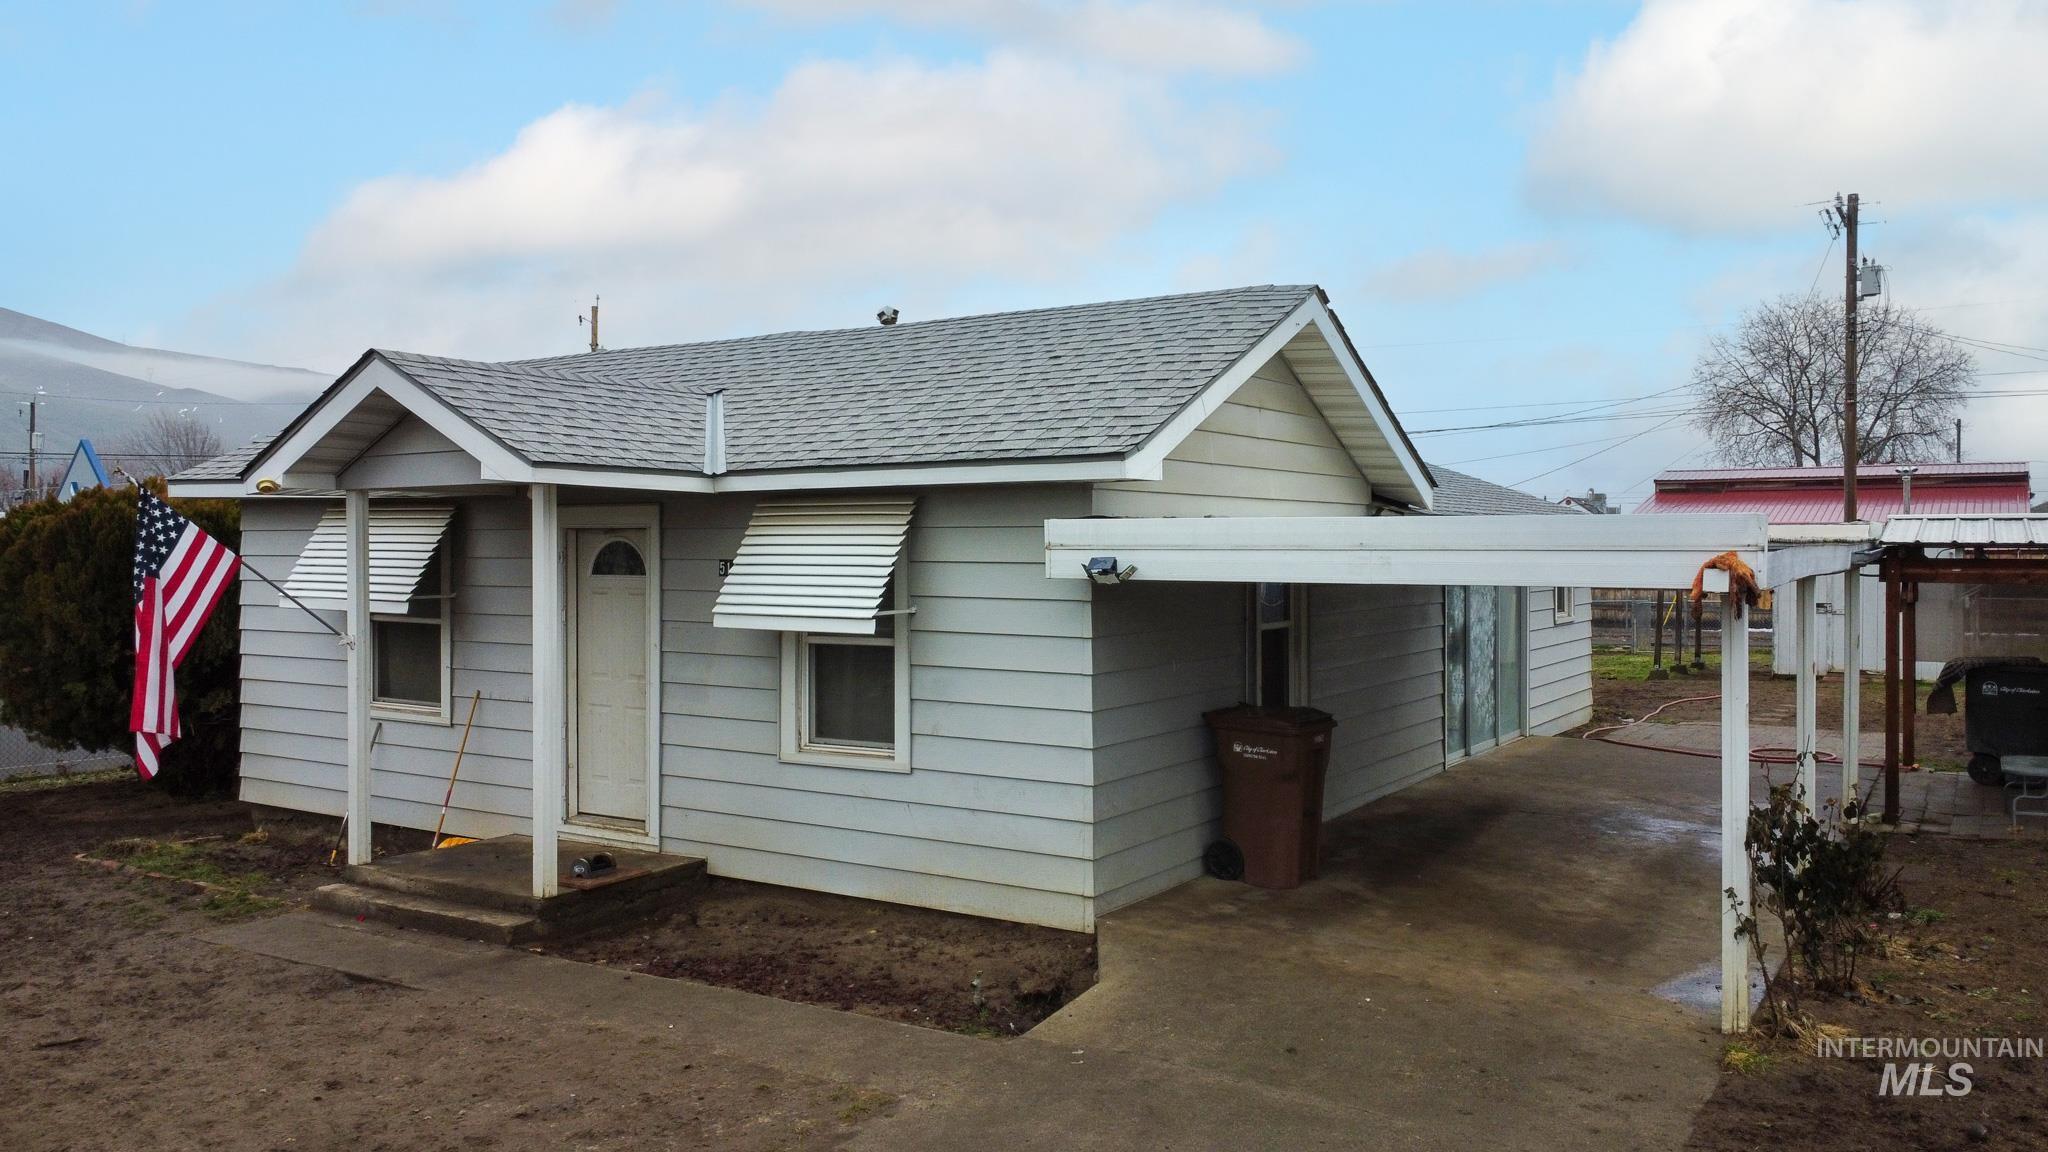 511 8th St., Clarkston, Washington 99403, 2 Bedrooms, 1 Bathroom, Residential For Sale, Price $169,000,MLS 98898928